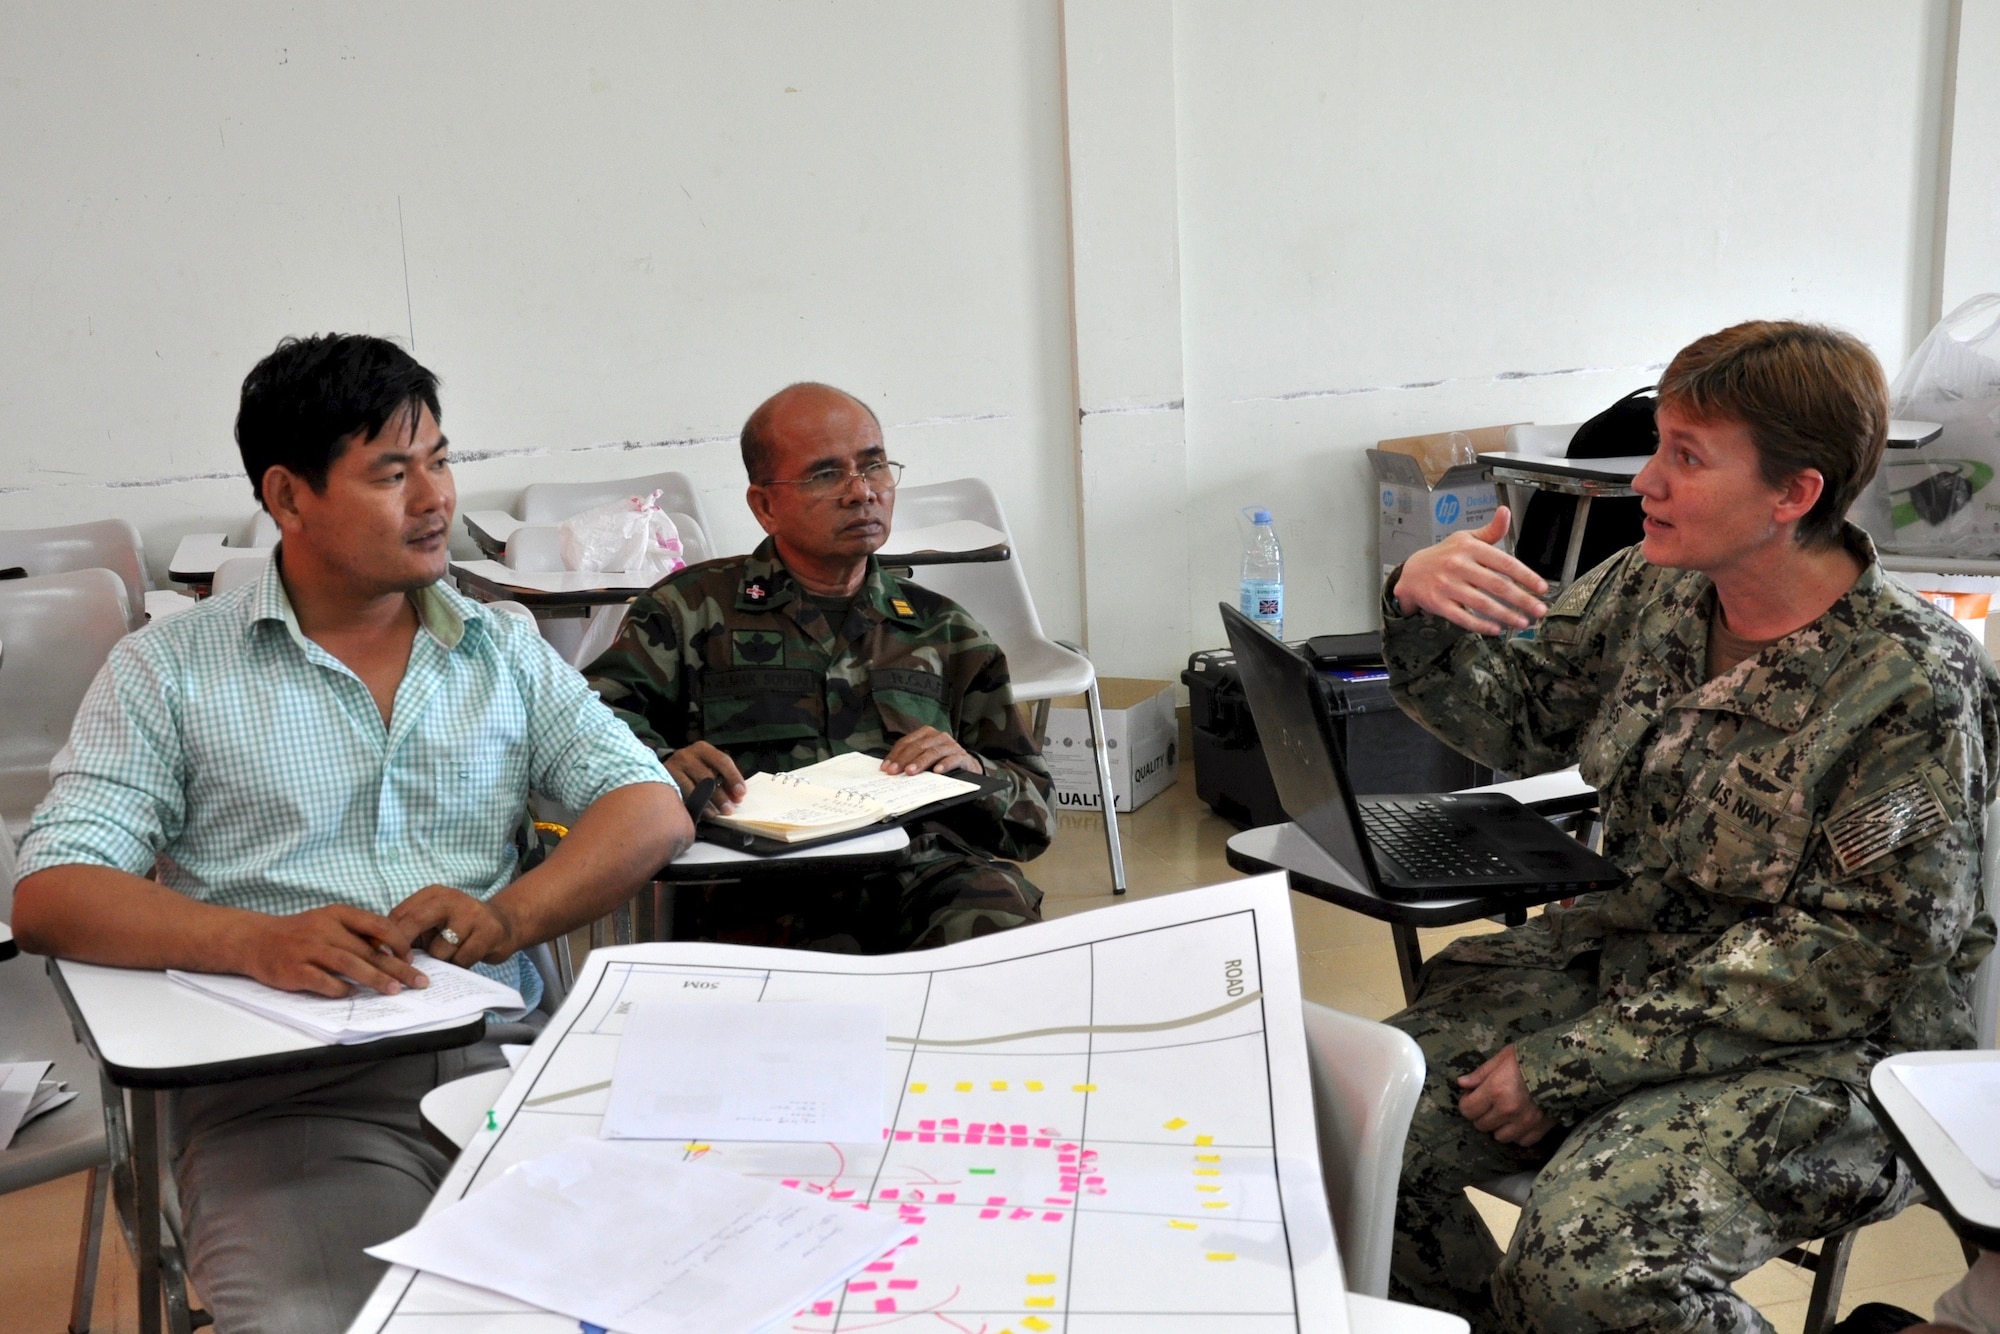 U.S. Navy Cmdr. Tammy Servies discusses a patient treatment scenario with Dr. Kim Seng Chawn and Dr. (Col.) Mak Sophai during a subject matter expert exchange focused on humanitarian assistance and disaster response June 9, 2016 in Kampot Province, Cambodia. The exchange was part of Pacific Angel 16, a U.S. Air Force led humanitarian assistance and civil military operation mission that builds partner capacity through medical and health outreach, engineering civic projects and subject matter exchanges. Participants included medical professionals from the U.S. Air Force, U.S. Navy, Australian Defense Forces, Royal Cambodian Armed Forces and Kampot Provincial Hospital and Health Center. Servies is a U.S. Navy Preventive Medicine Physician deployed from Navy Environmental and Preventive Medicine Unit 6 as part of Pacific Angel 16-2. (U.S. Air Force photo by Capt. Susan Harrington)